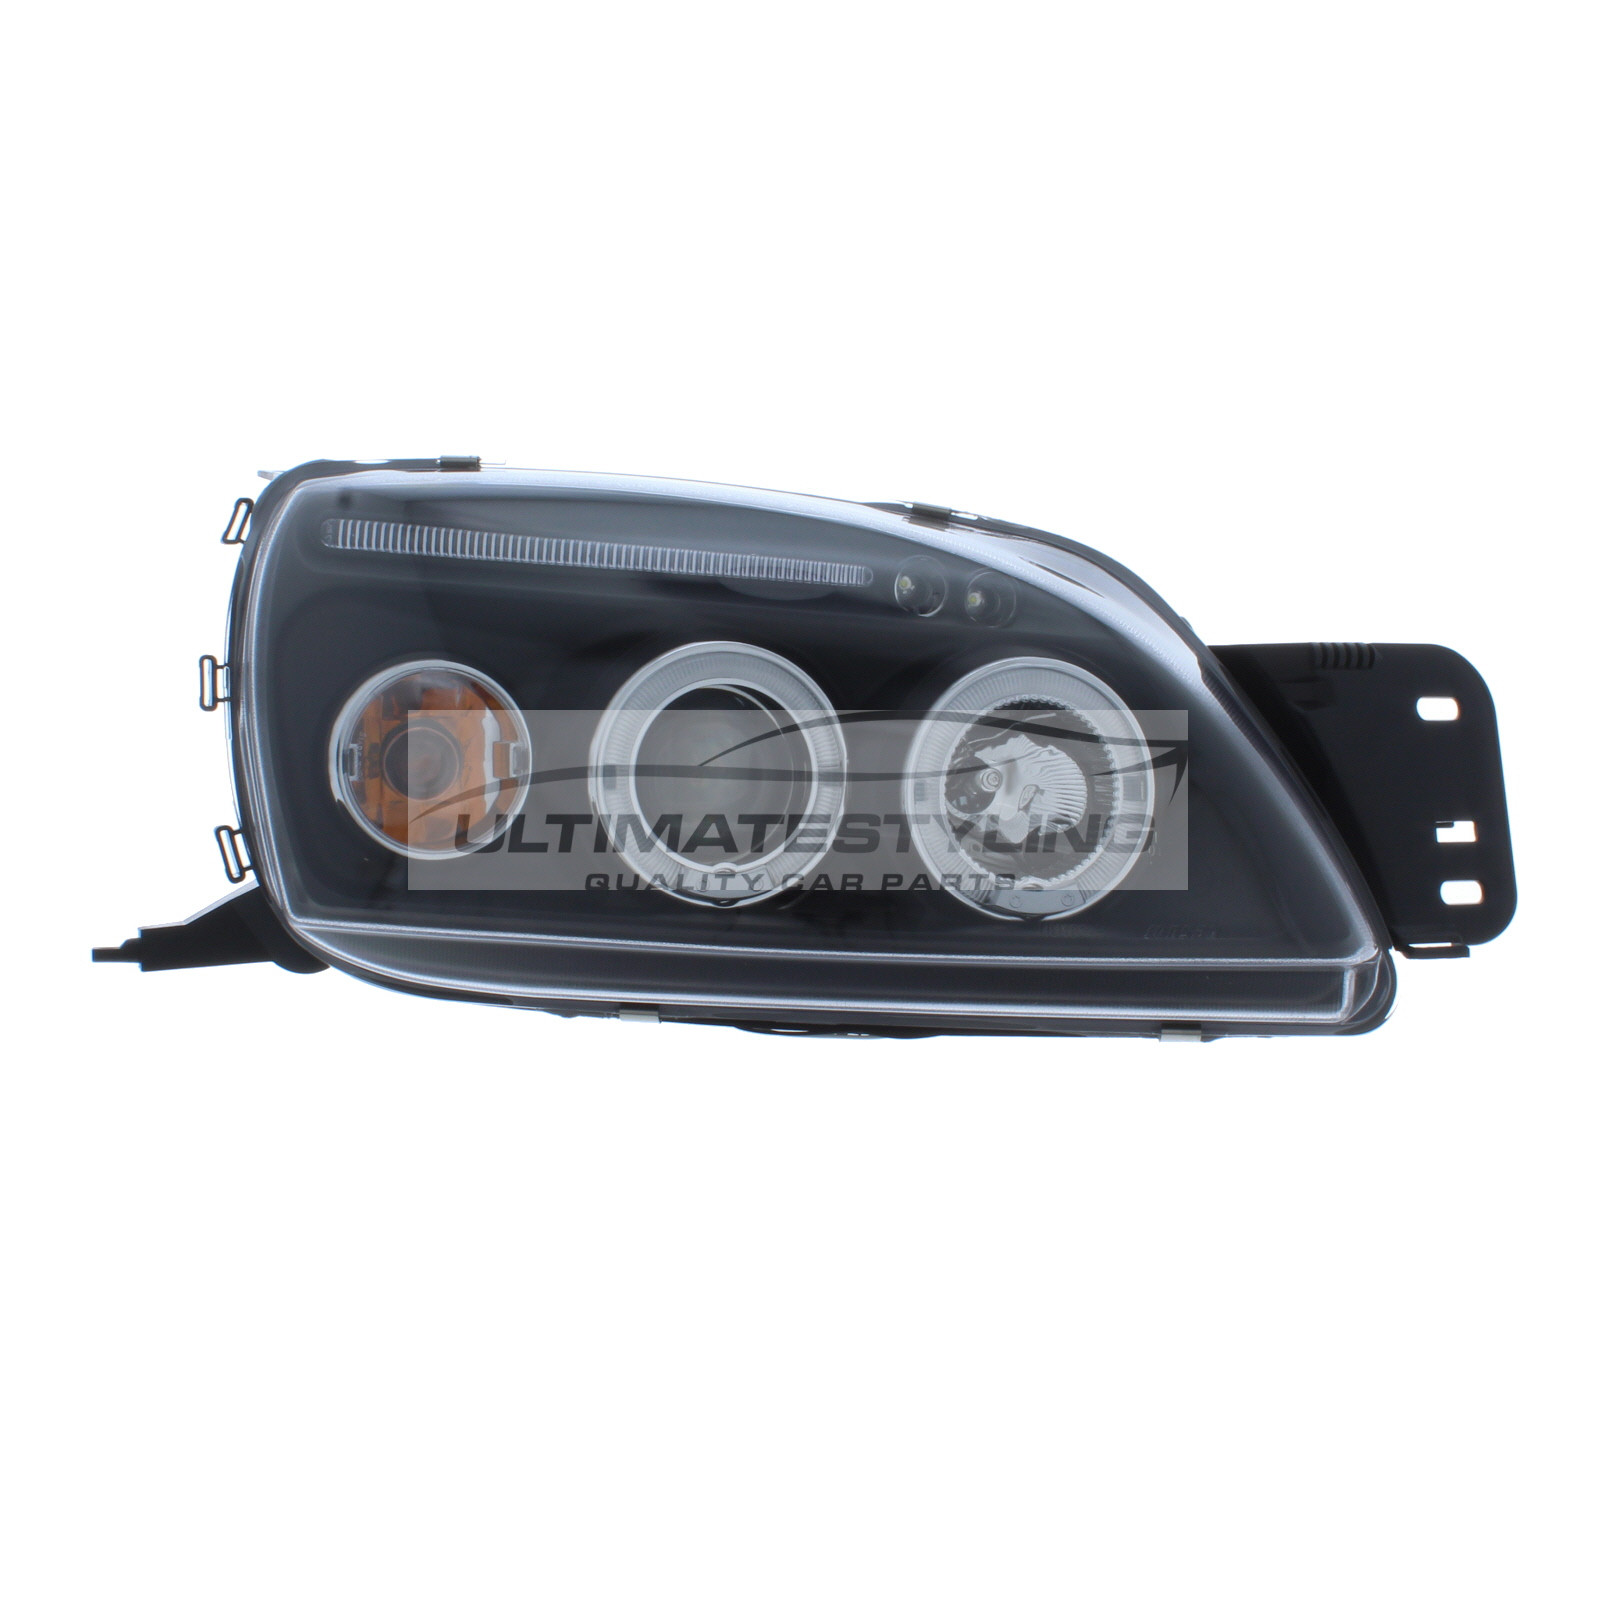 Ford Fiesta Mk5 1999-2002 Upgrade Headlights Black Inner LED Twin Angel Eyes Halo and LED DRL Projector Xenon Look